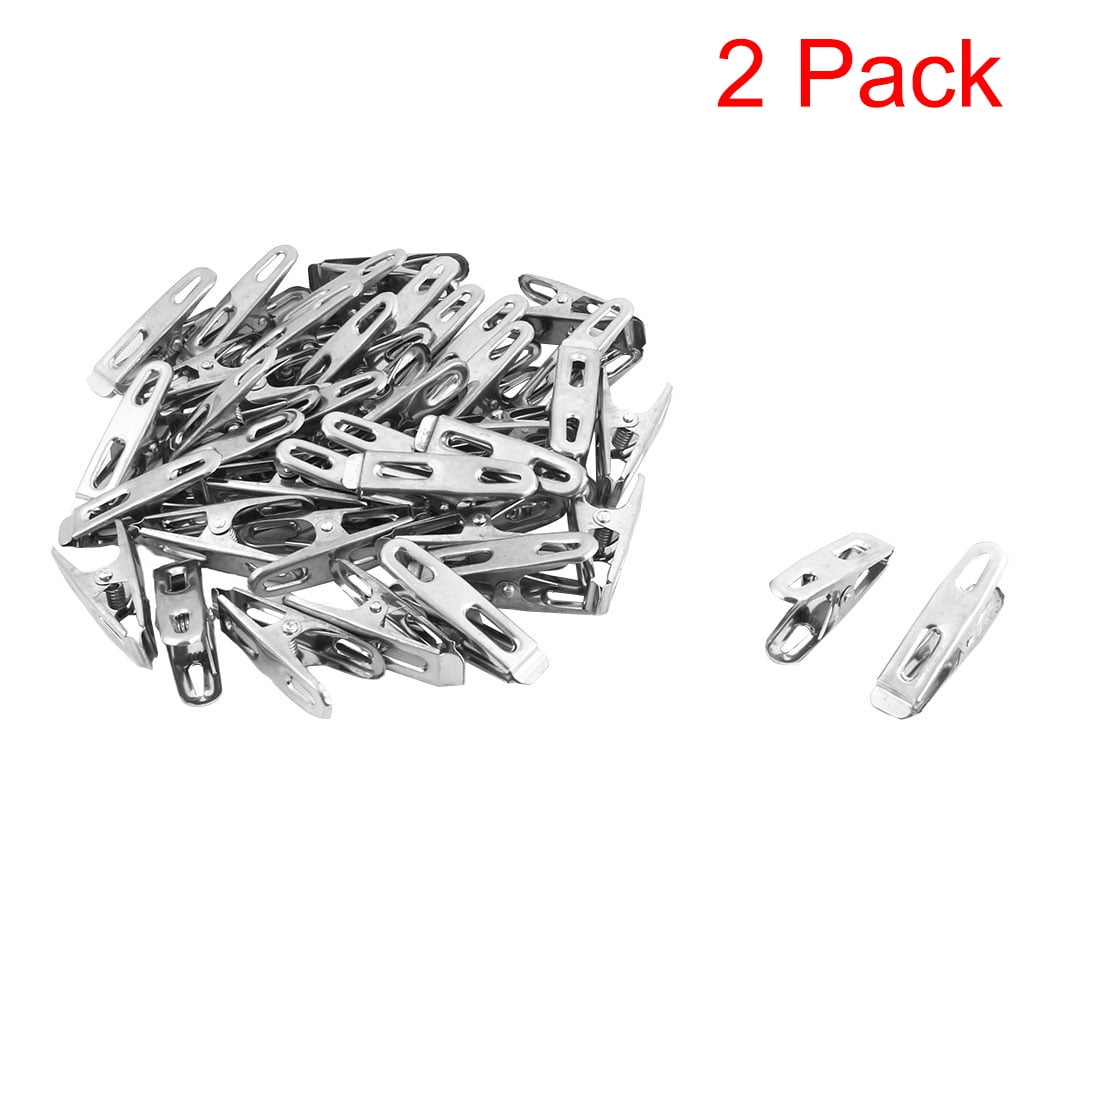 NEW Pack of 40 Stainless Steel Spring Loaded Metal Laundry Clothes Clip Pegs 